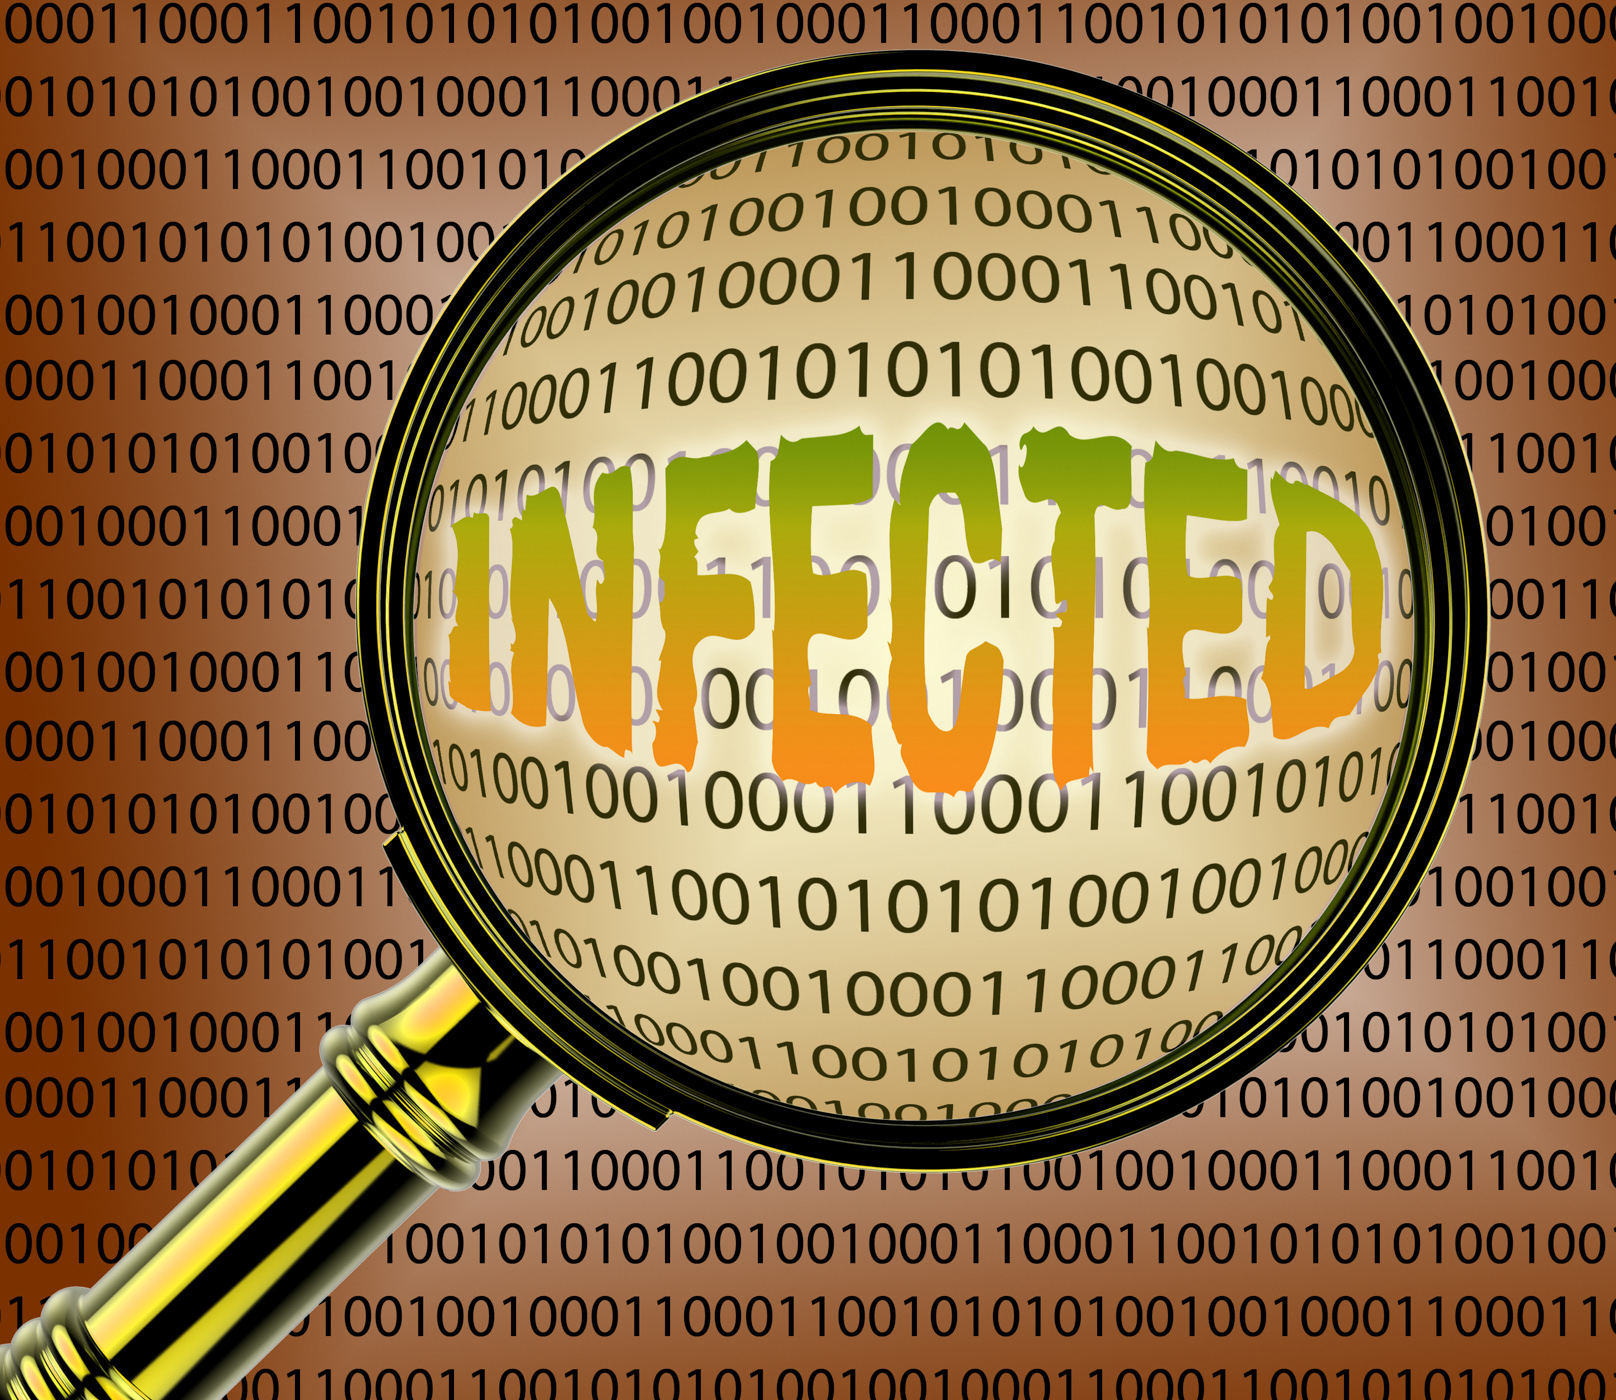 Infected data means magnify computers and files photo